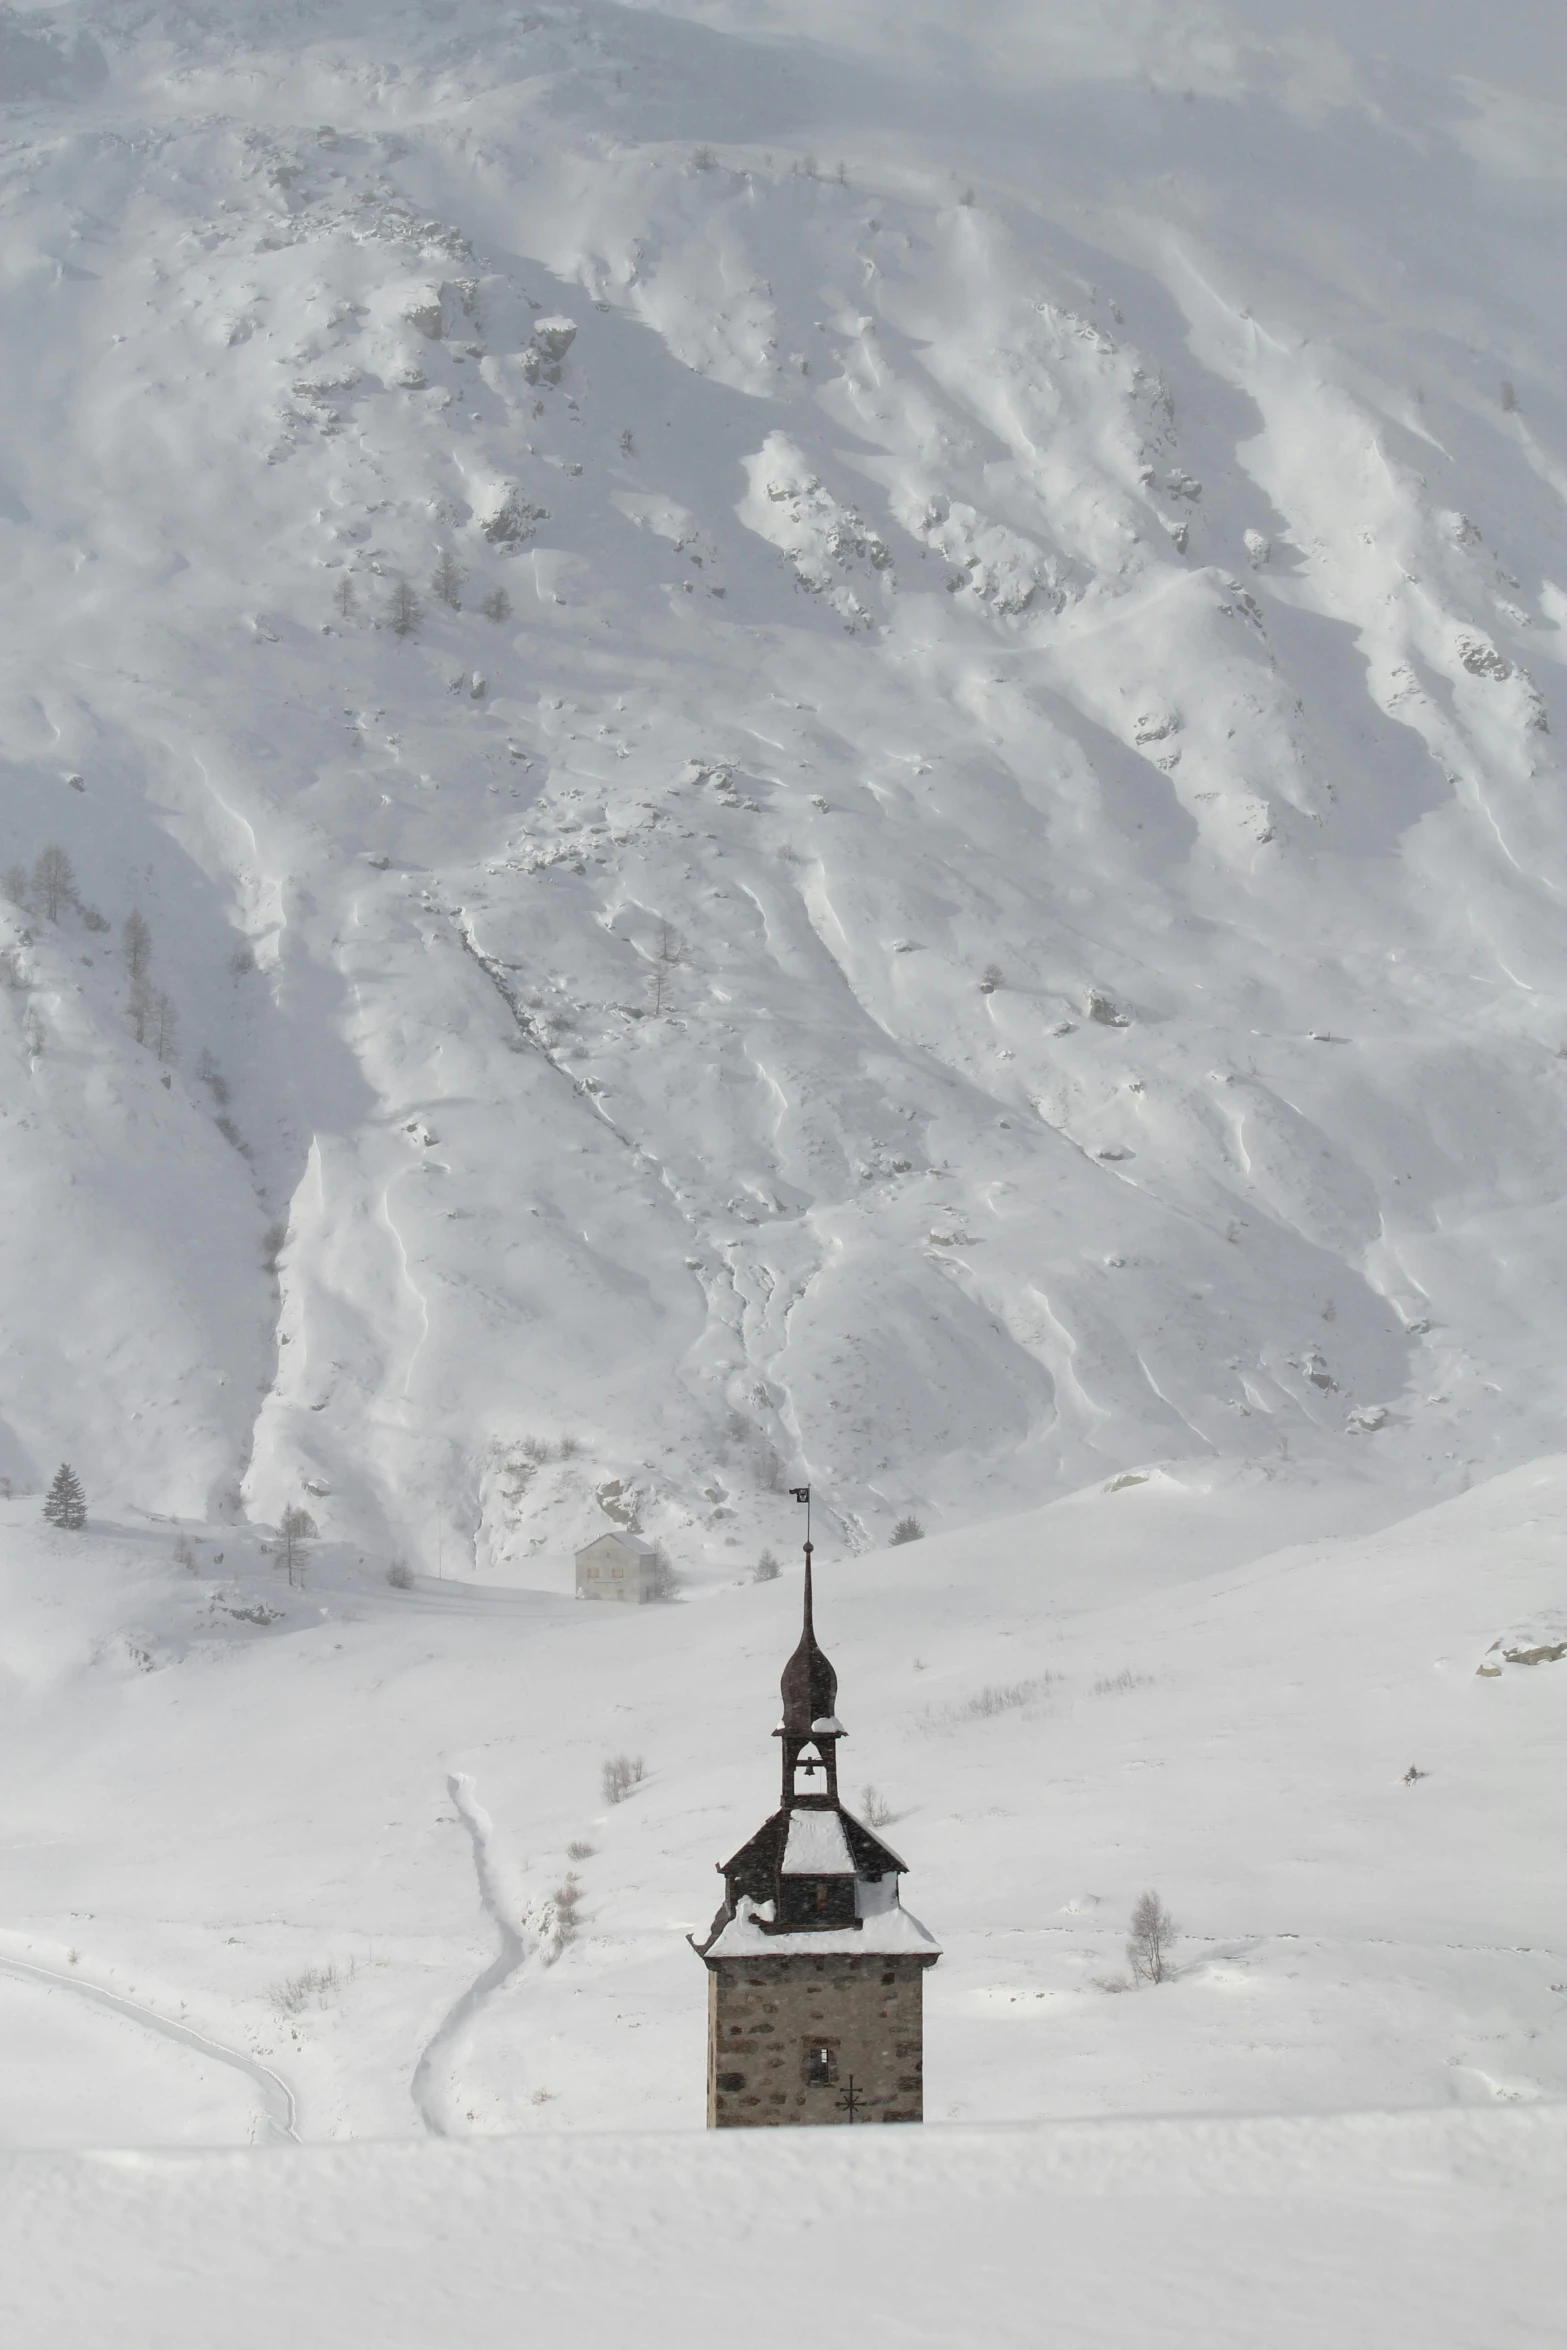 there is a small church in the snow